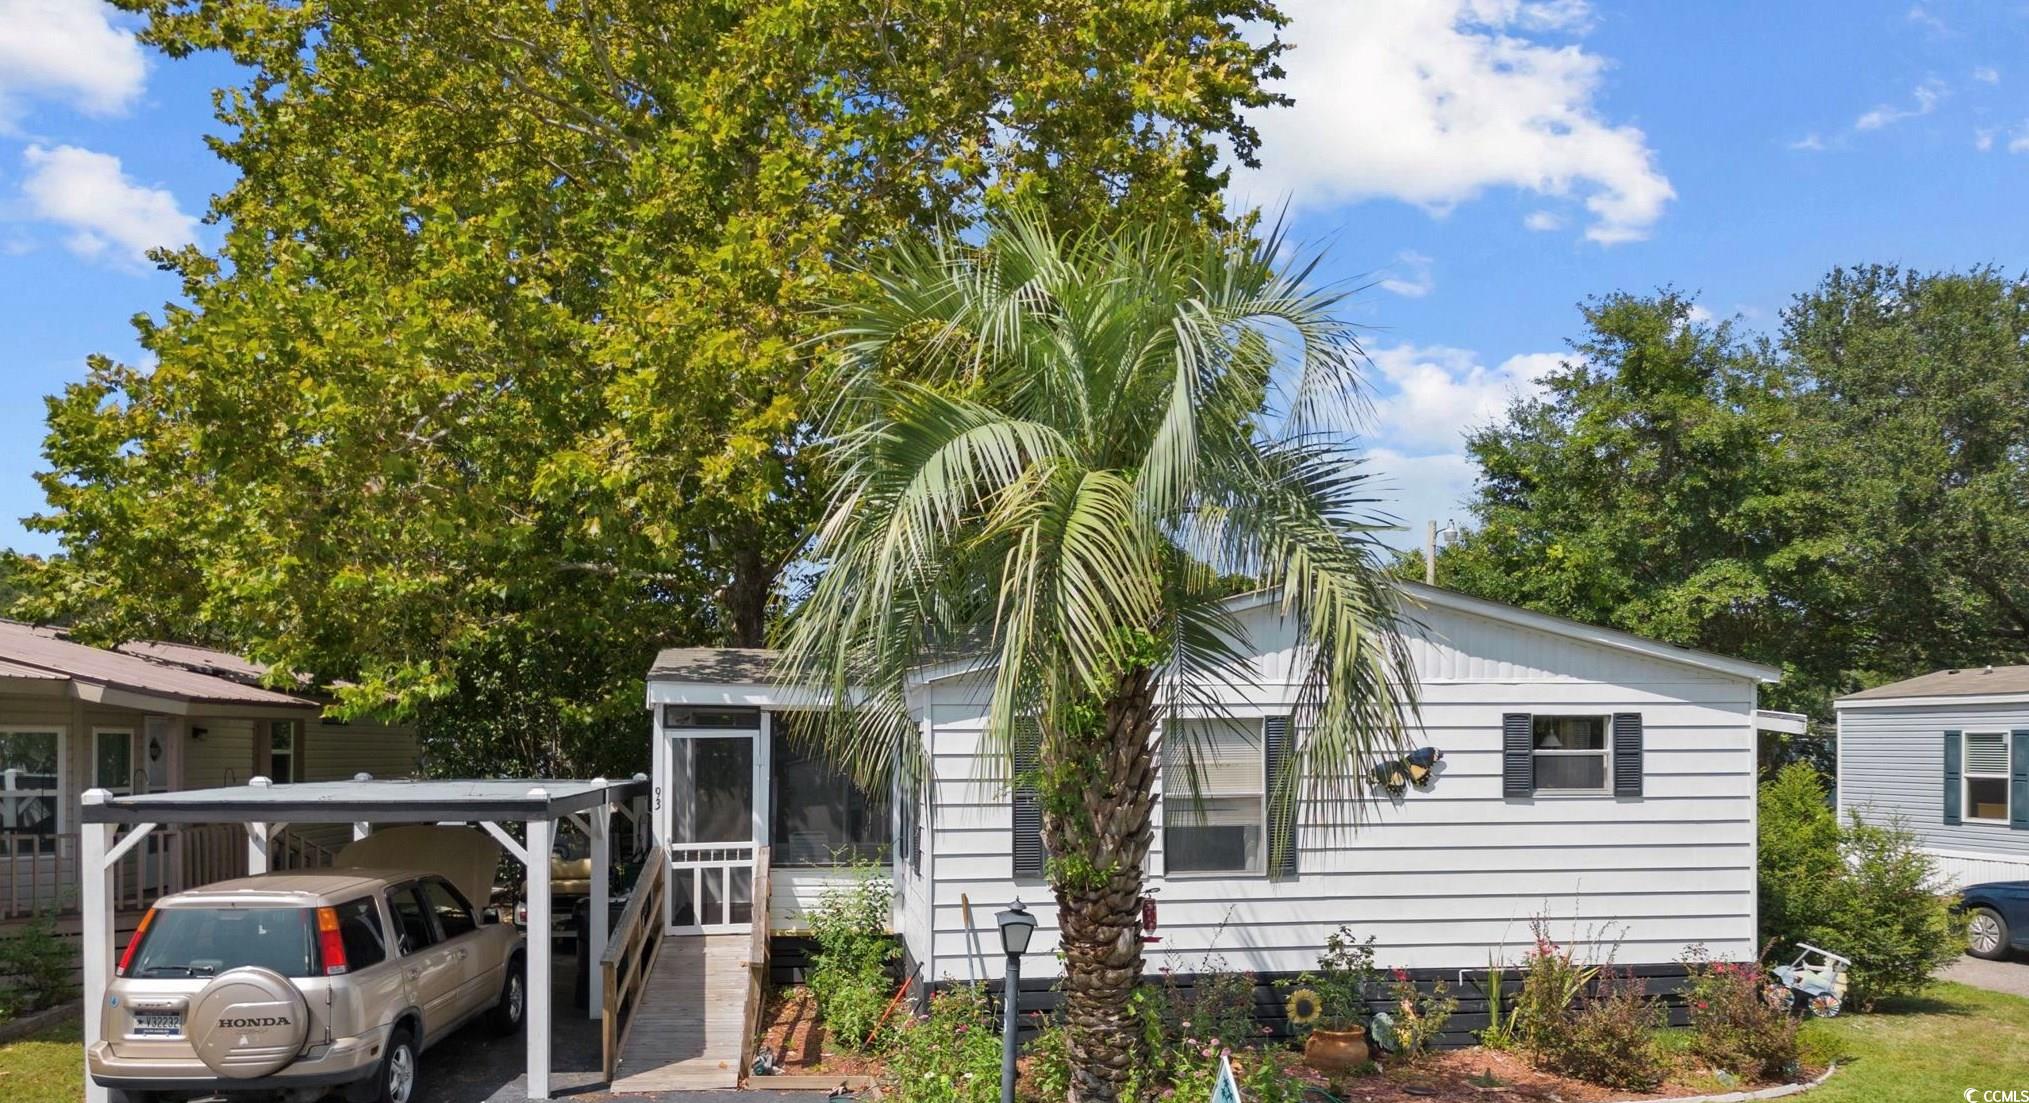 newly refurbished 3 bedroom, 2 bathroom double wide manufactured home in inlet oaks village: a vibrant 55 and older community offering a clubhouse and pool exclusively for residents and their guests. this charming residence is ideally situated near waccamaw hospital, brookgreen gardens, and the renowned murrells inlet marshwalk.  the property boasts an array of features, including a convenient carport, two inviting screened-in porches, a spacious master bedroom, a wheelchair ramp, and a modernized kitchen. positioned to face the serene pond, residents can relish picturesque sunrises each morning, creating an idyllic living environment. seller financing is available.